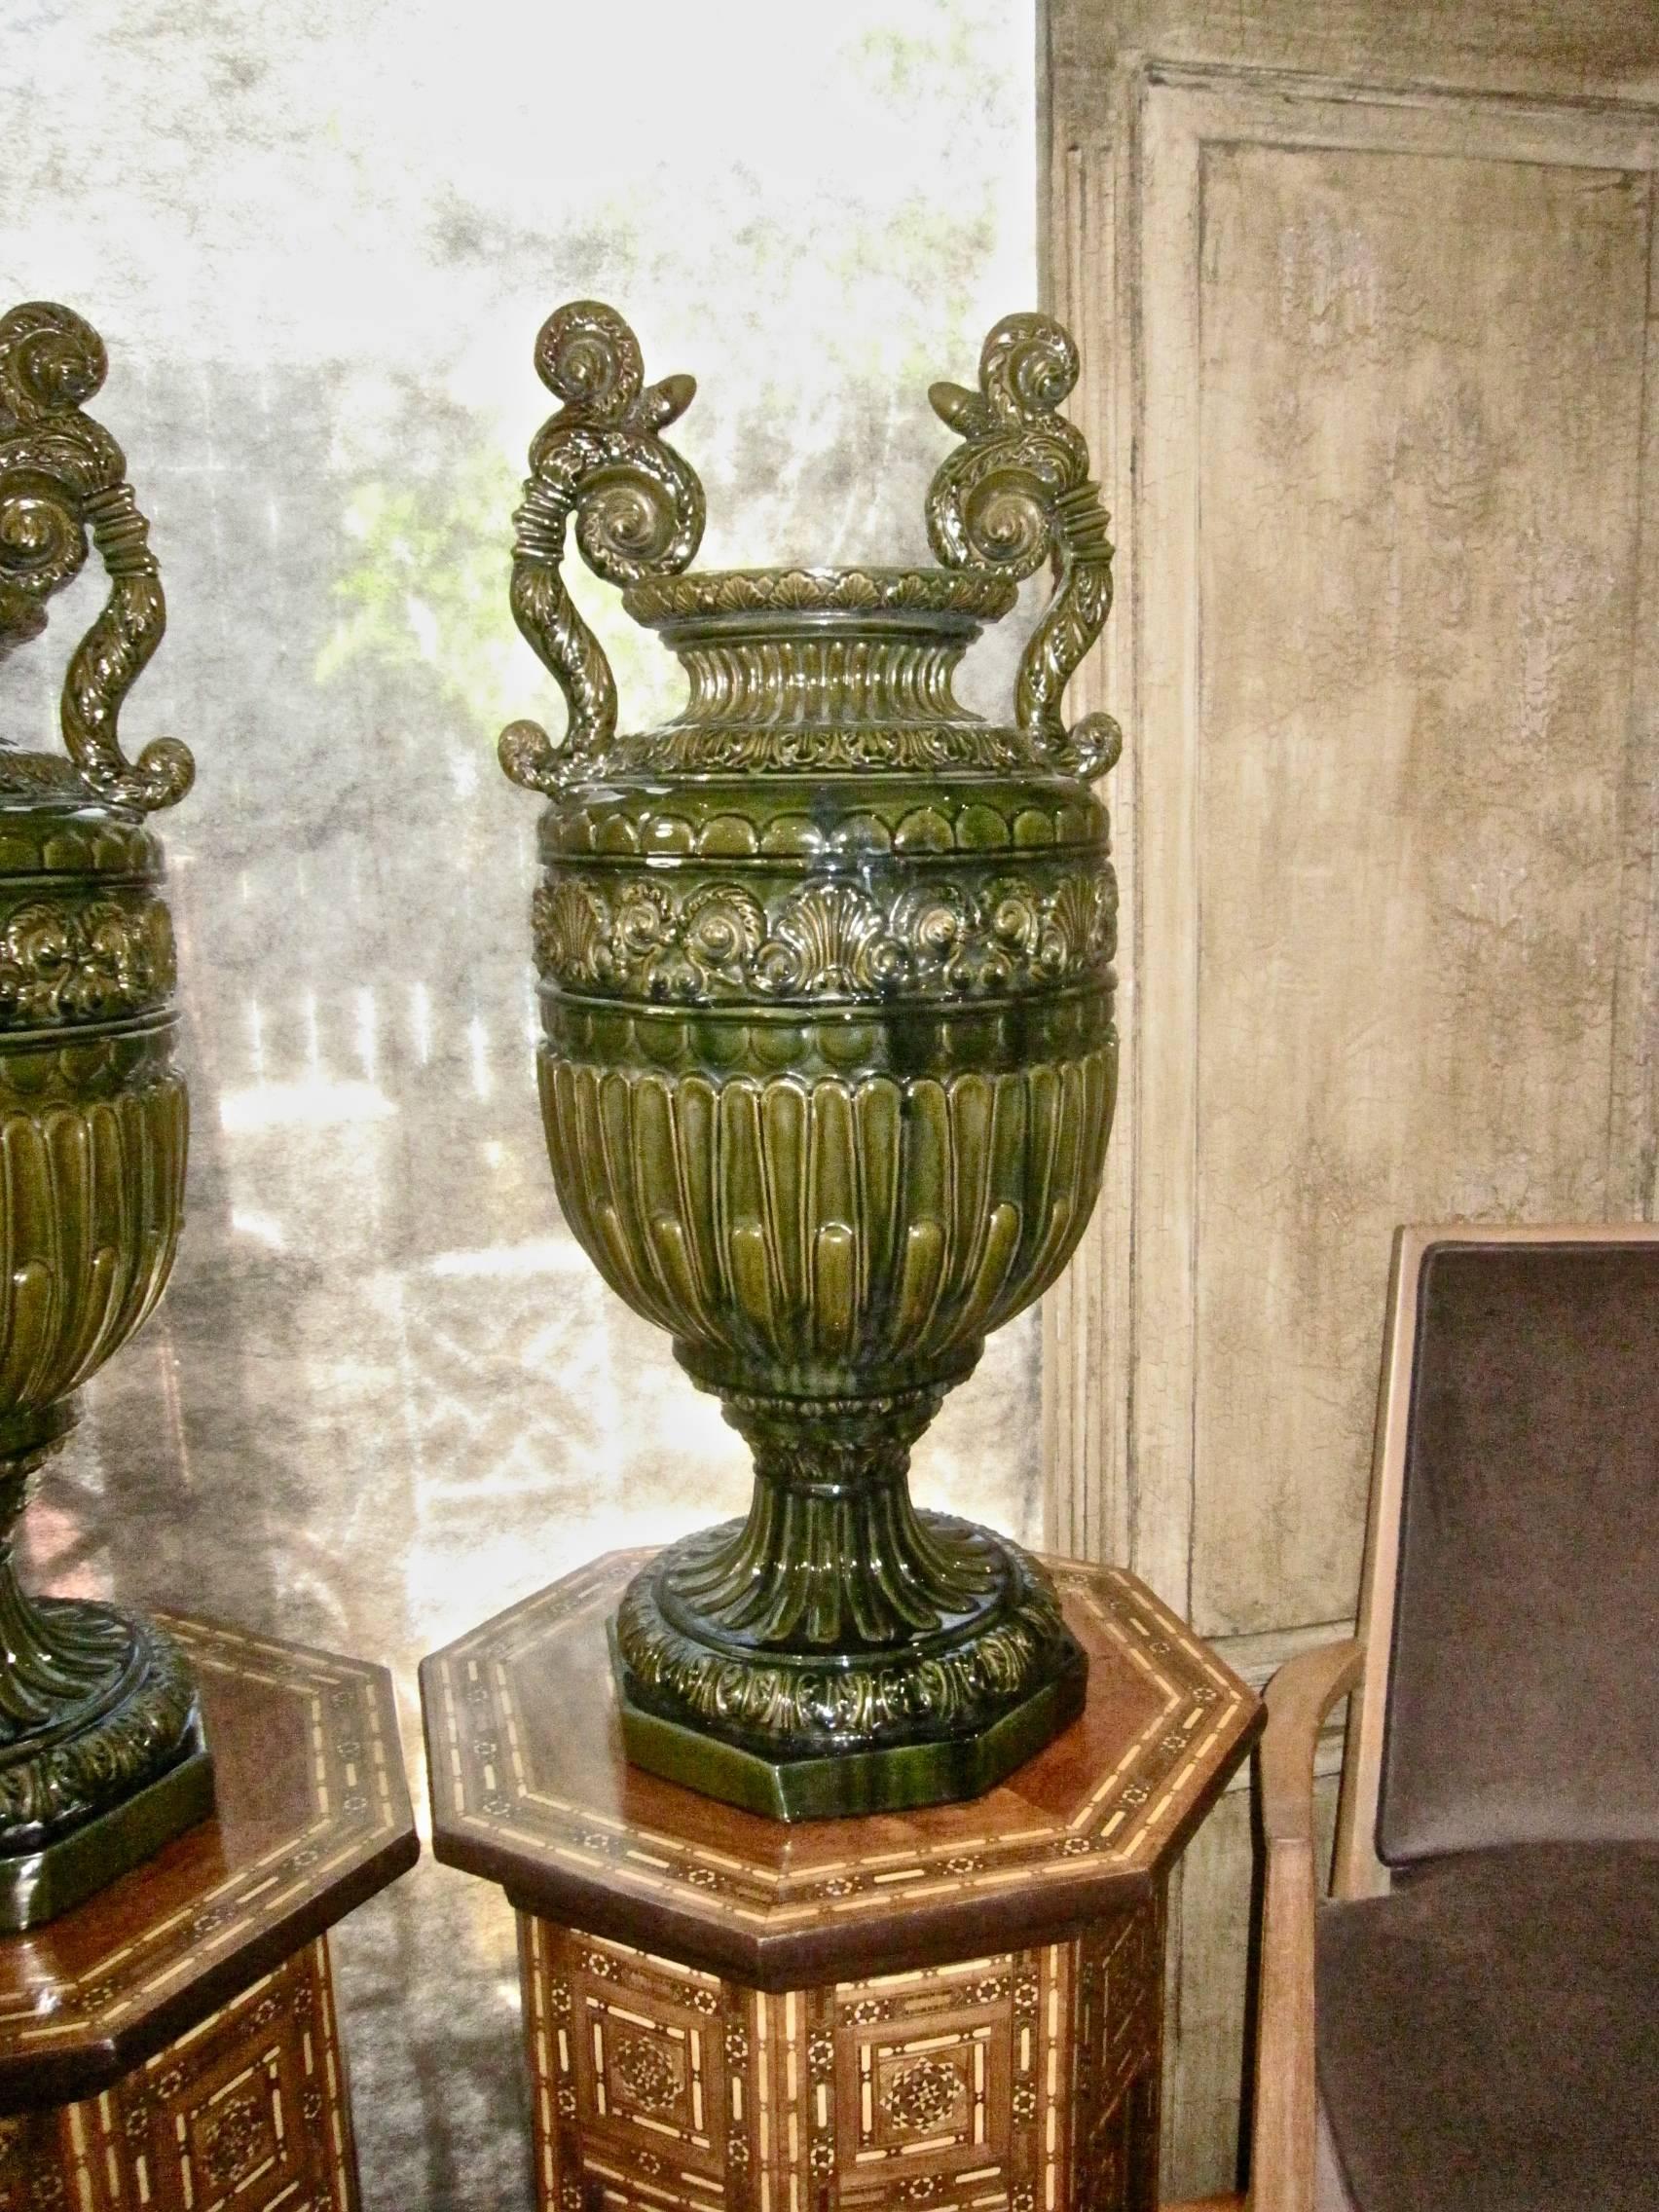 This a stunning and very large pair of signed French Faience/Majolica handled urns by the famous French potter Jerome Massier Fils, Vallauris. The urns were created in the Renaissance Revival Style and date to, circa 1870-1880. The Massiers family